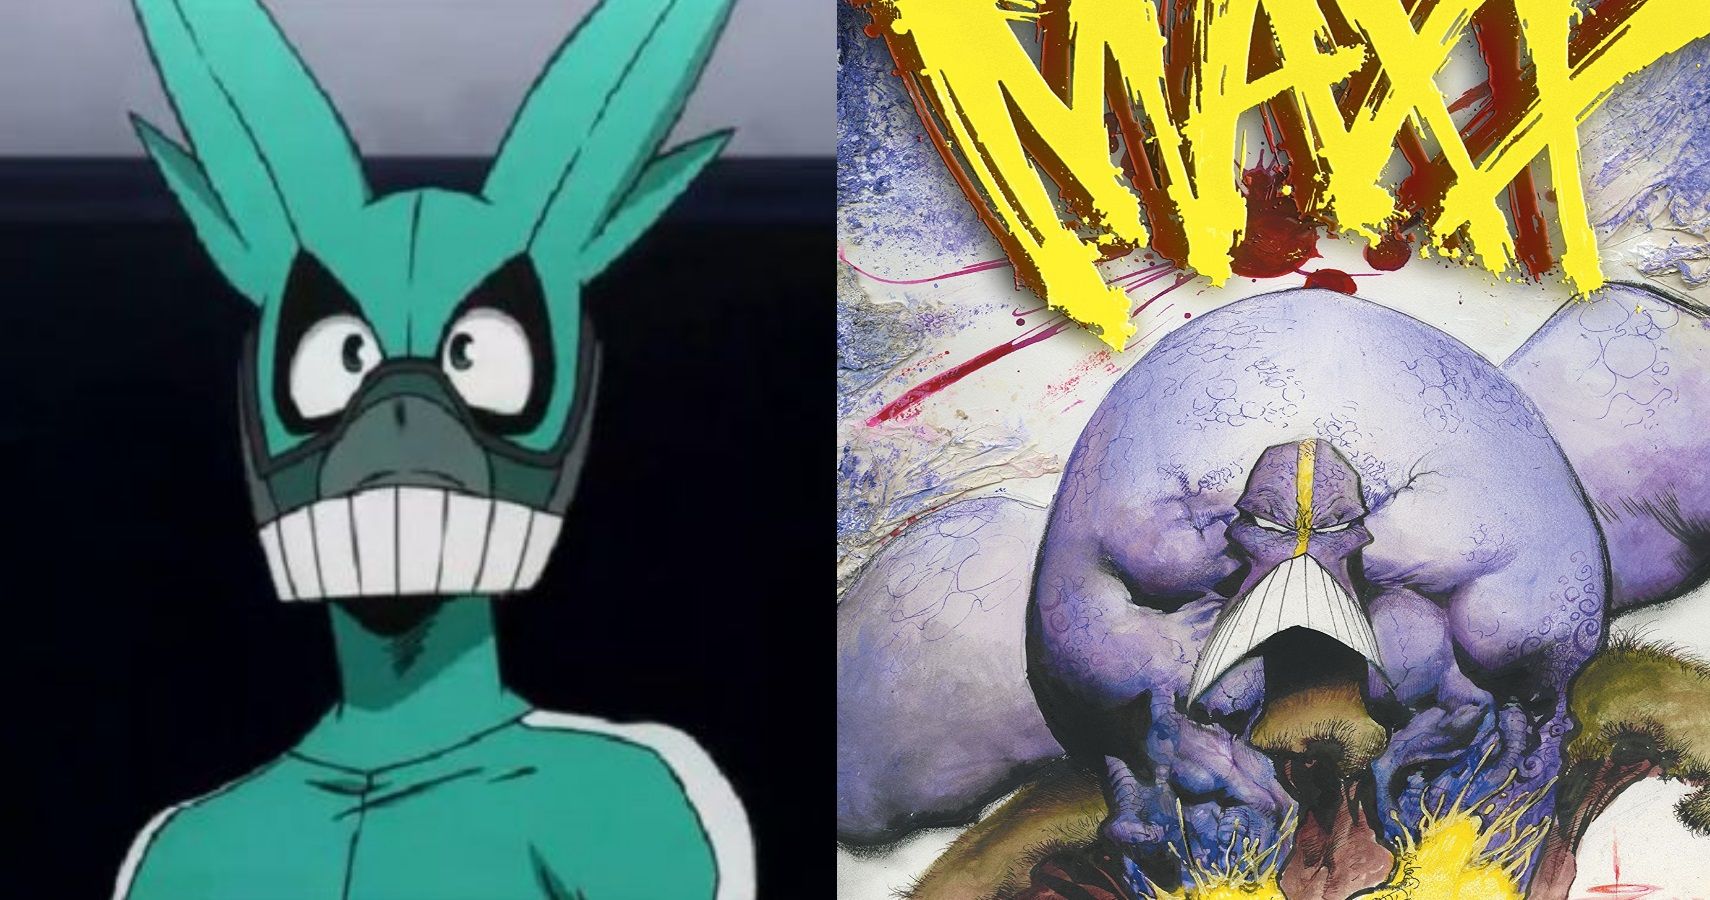 10 My Hero Academia characters who were inspired by Marvel